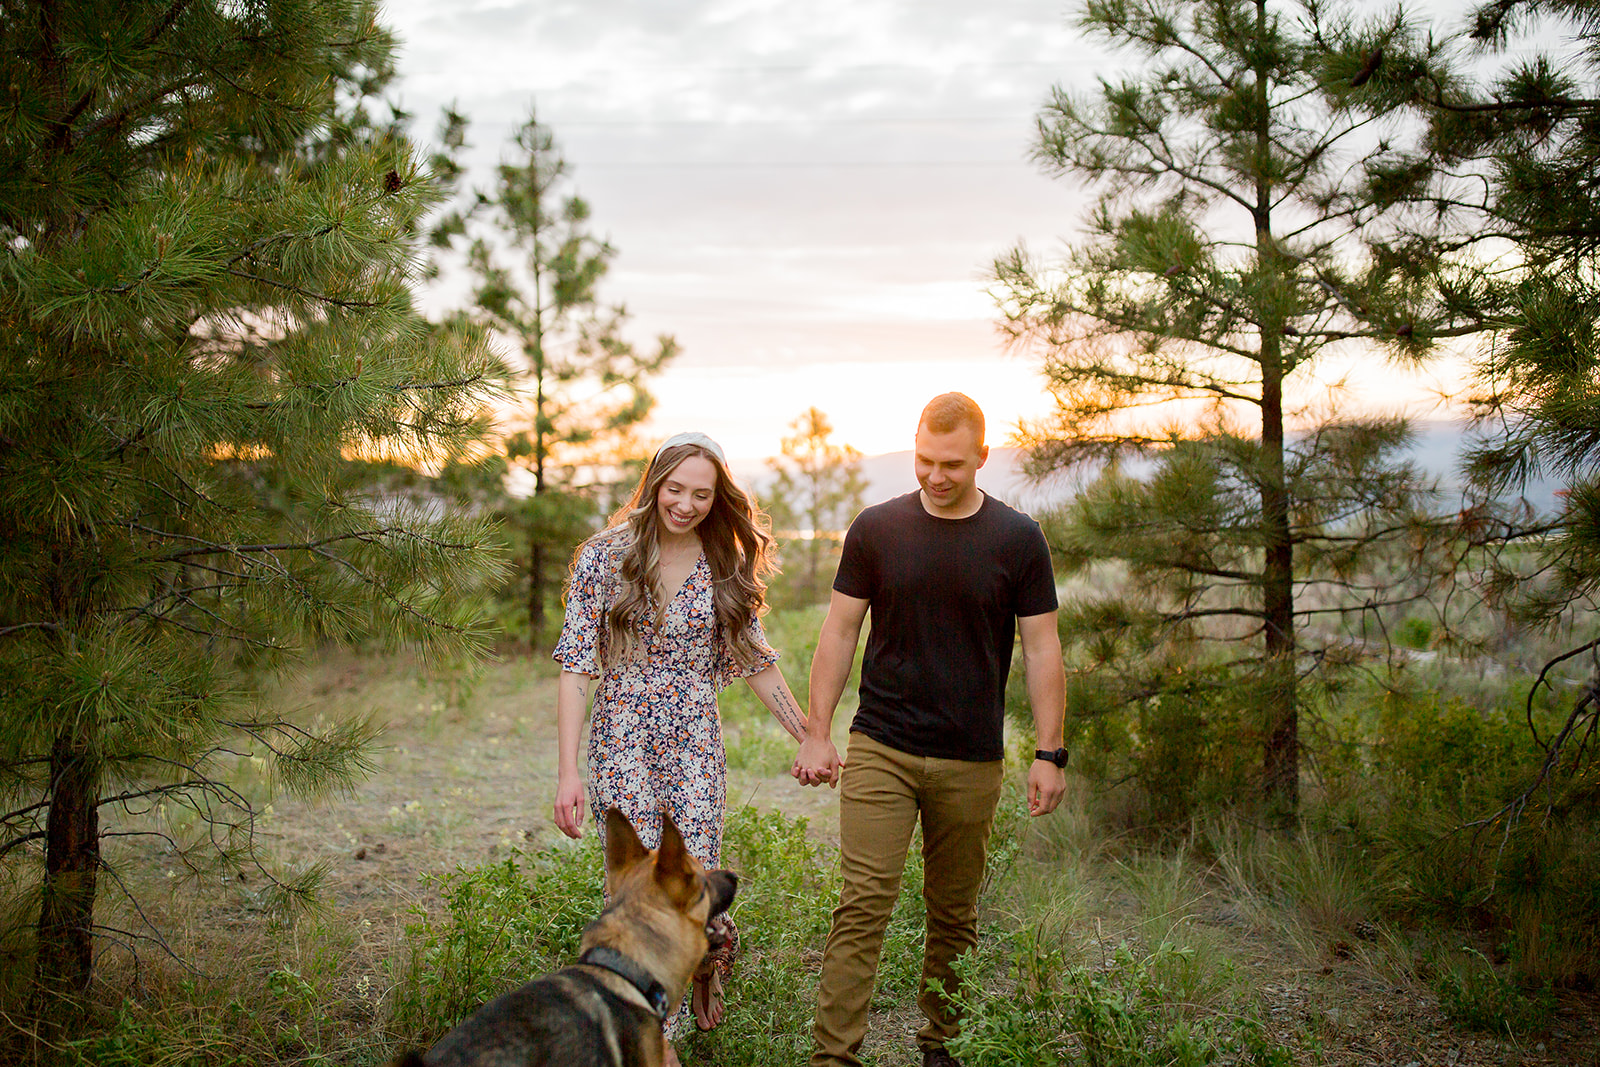 Newly engaged couple smiles warmly at their dog during their outdoor photoshoot in Kamloops at golden hour